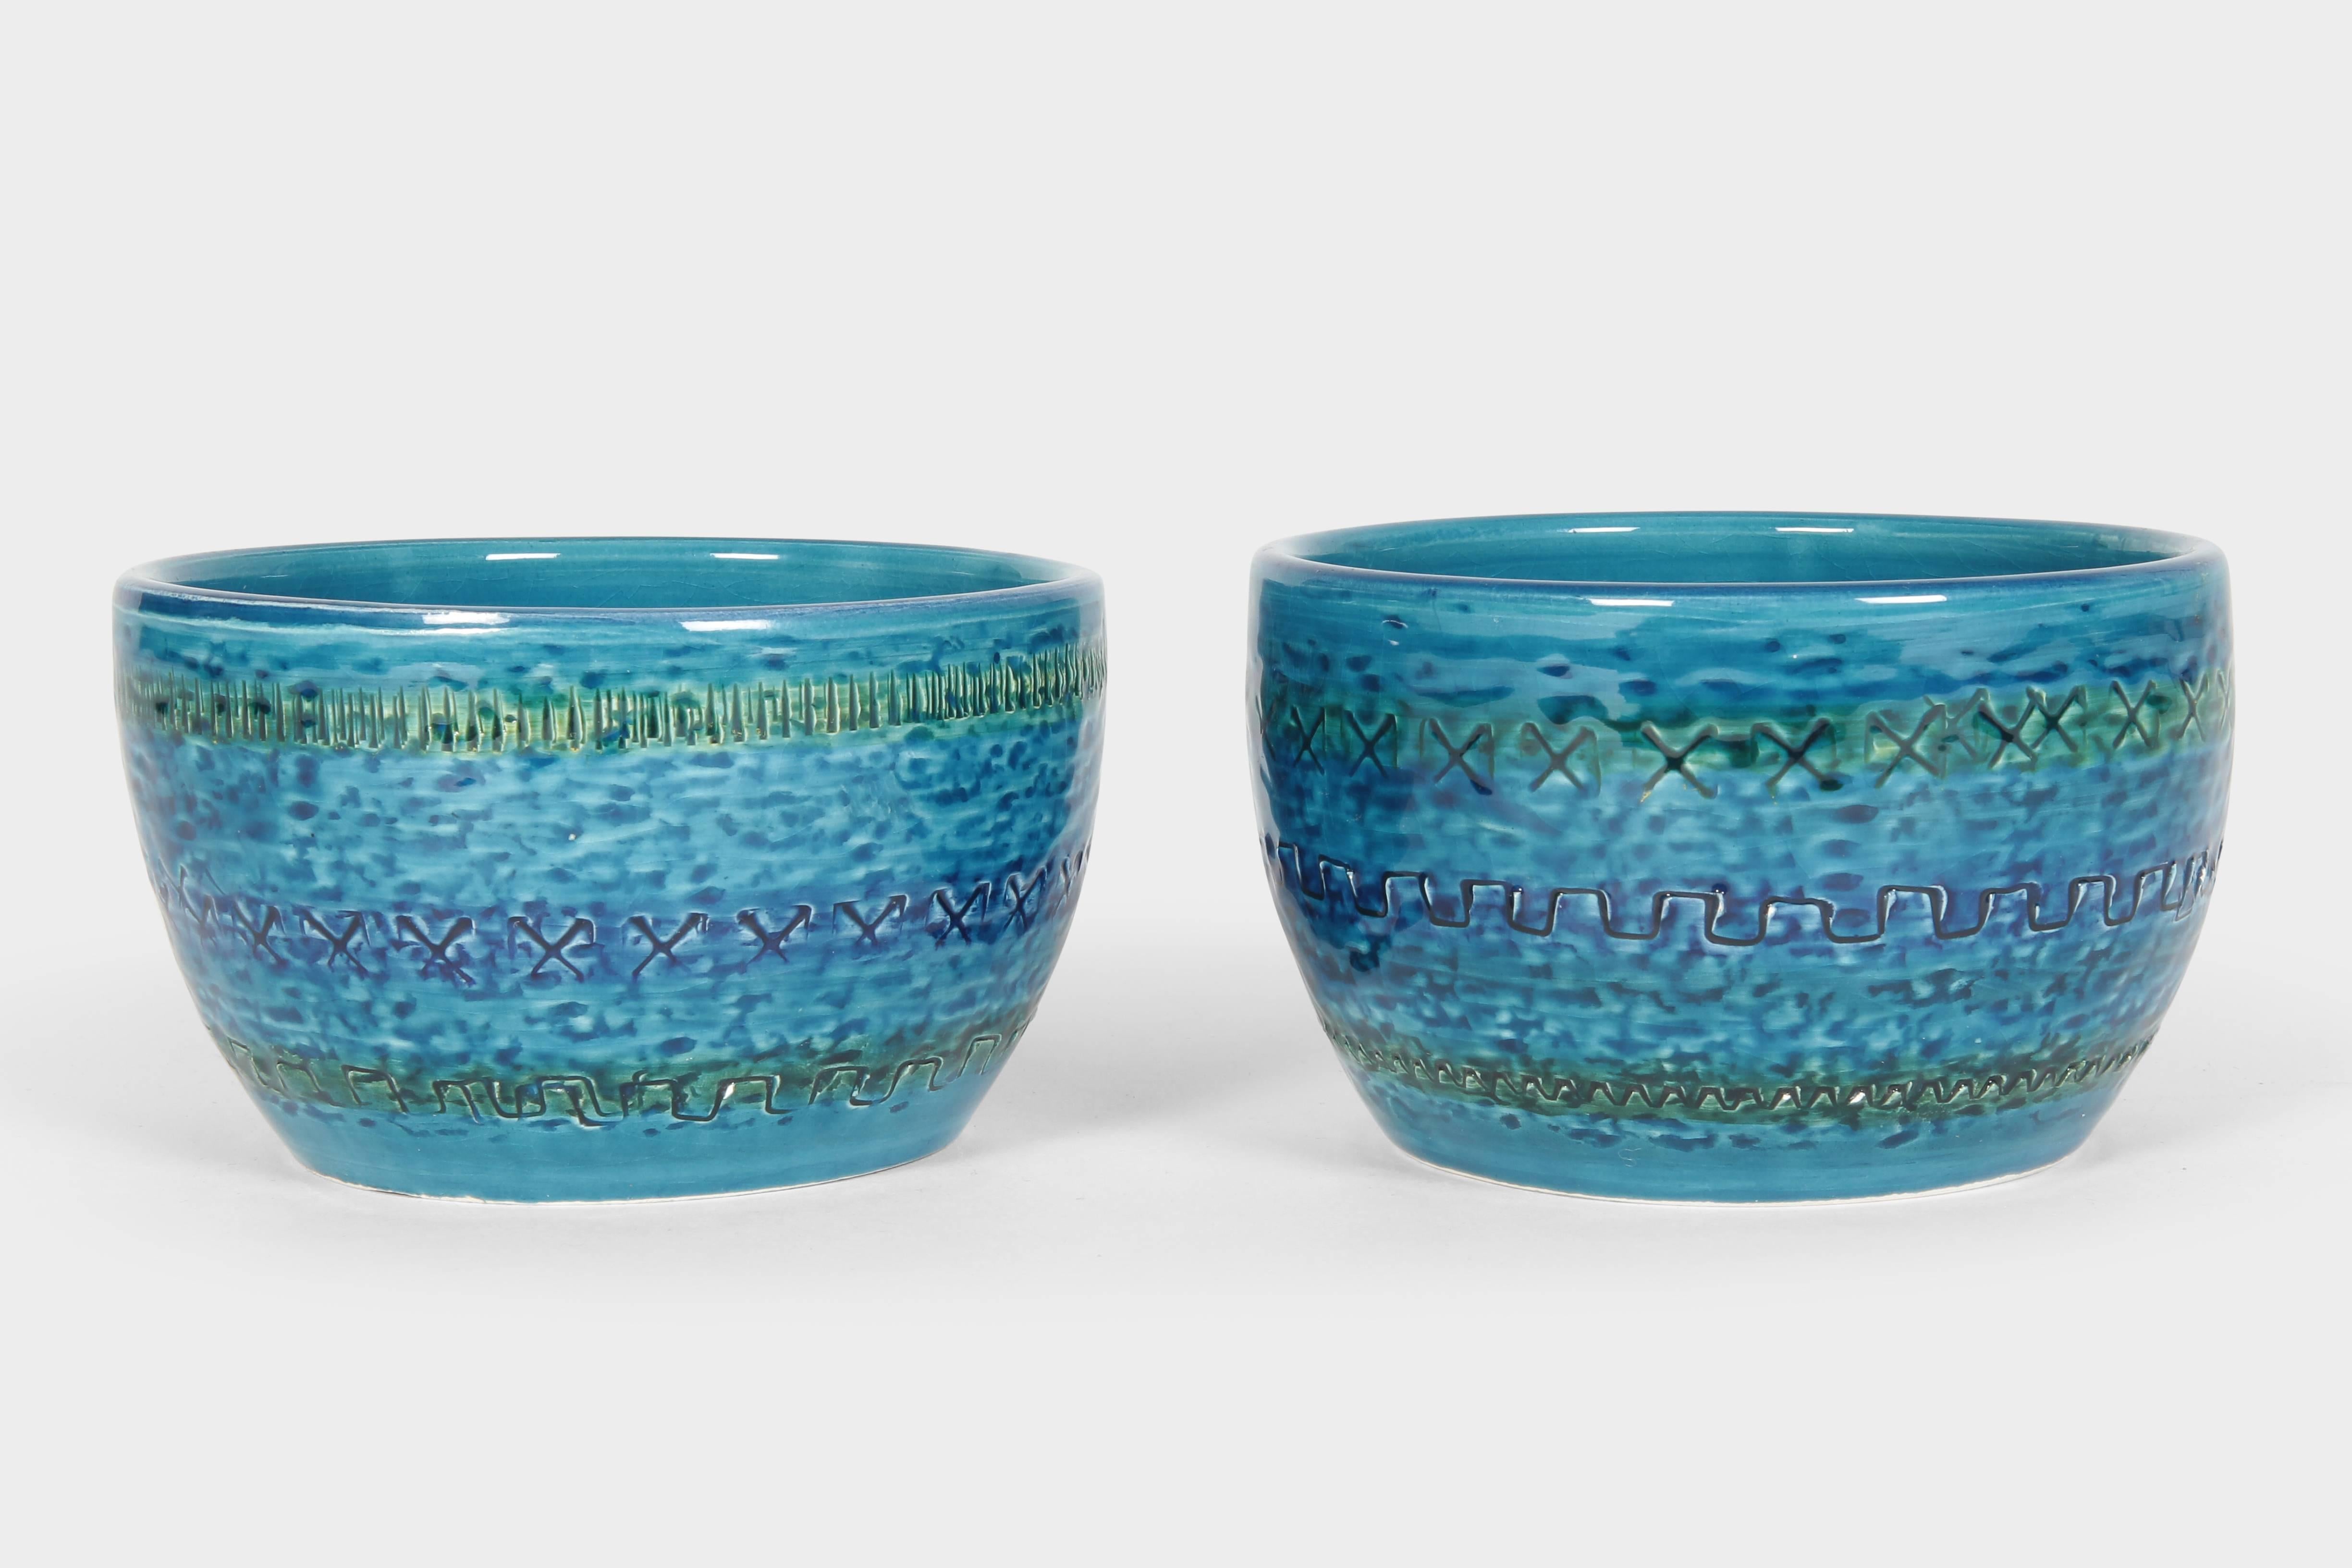 Aldo Londi “Rimini Blu” bowls manufactured by Bitossi in the 1960s. Handmade ceramic bowls from Aldo Londi’s iconic “Rimini Blu” collection. Deep blue glazed ceramics with engraved patterns. The gorgeous shades of blue and the geometric design of